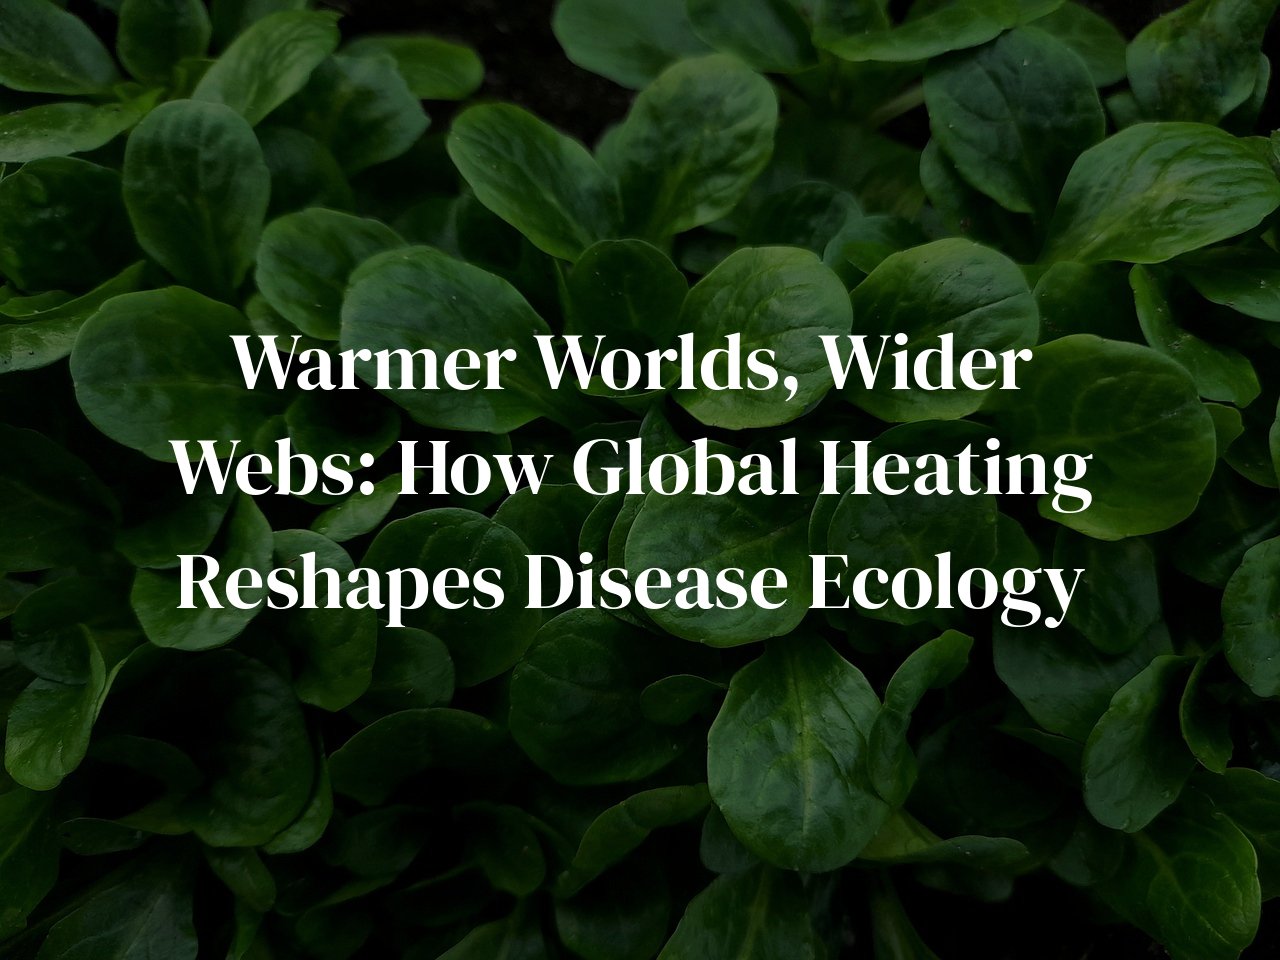 Warmer Worlds, Wider Webs: How Global Heating Reshapes Disease Ecology